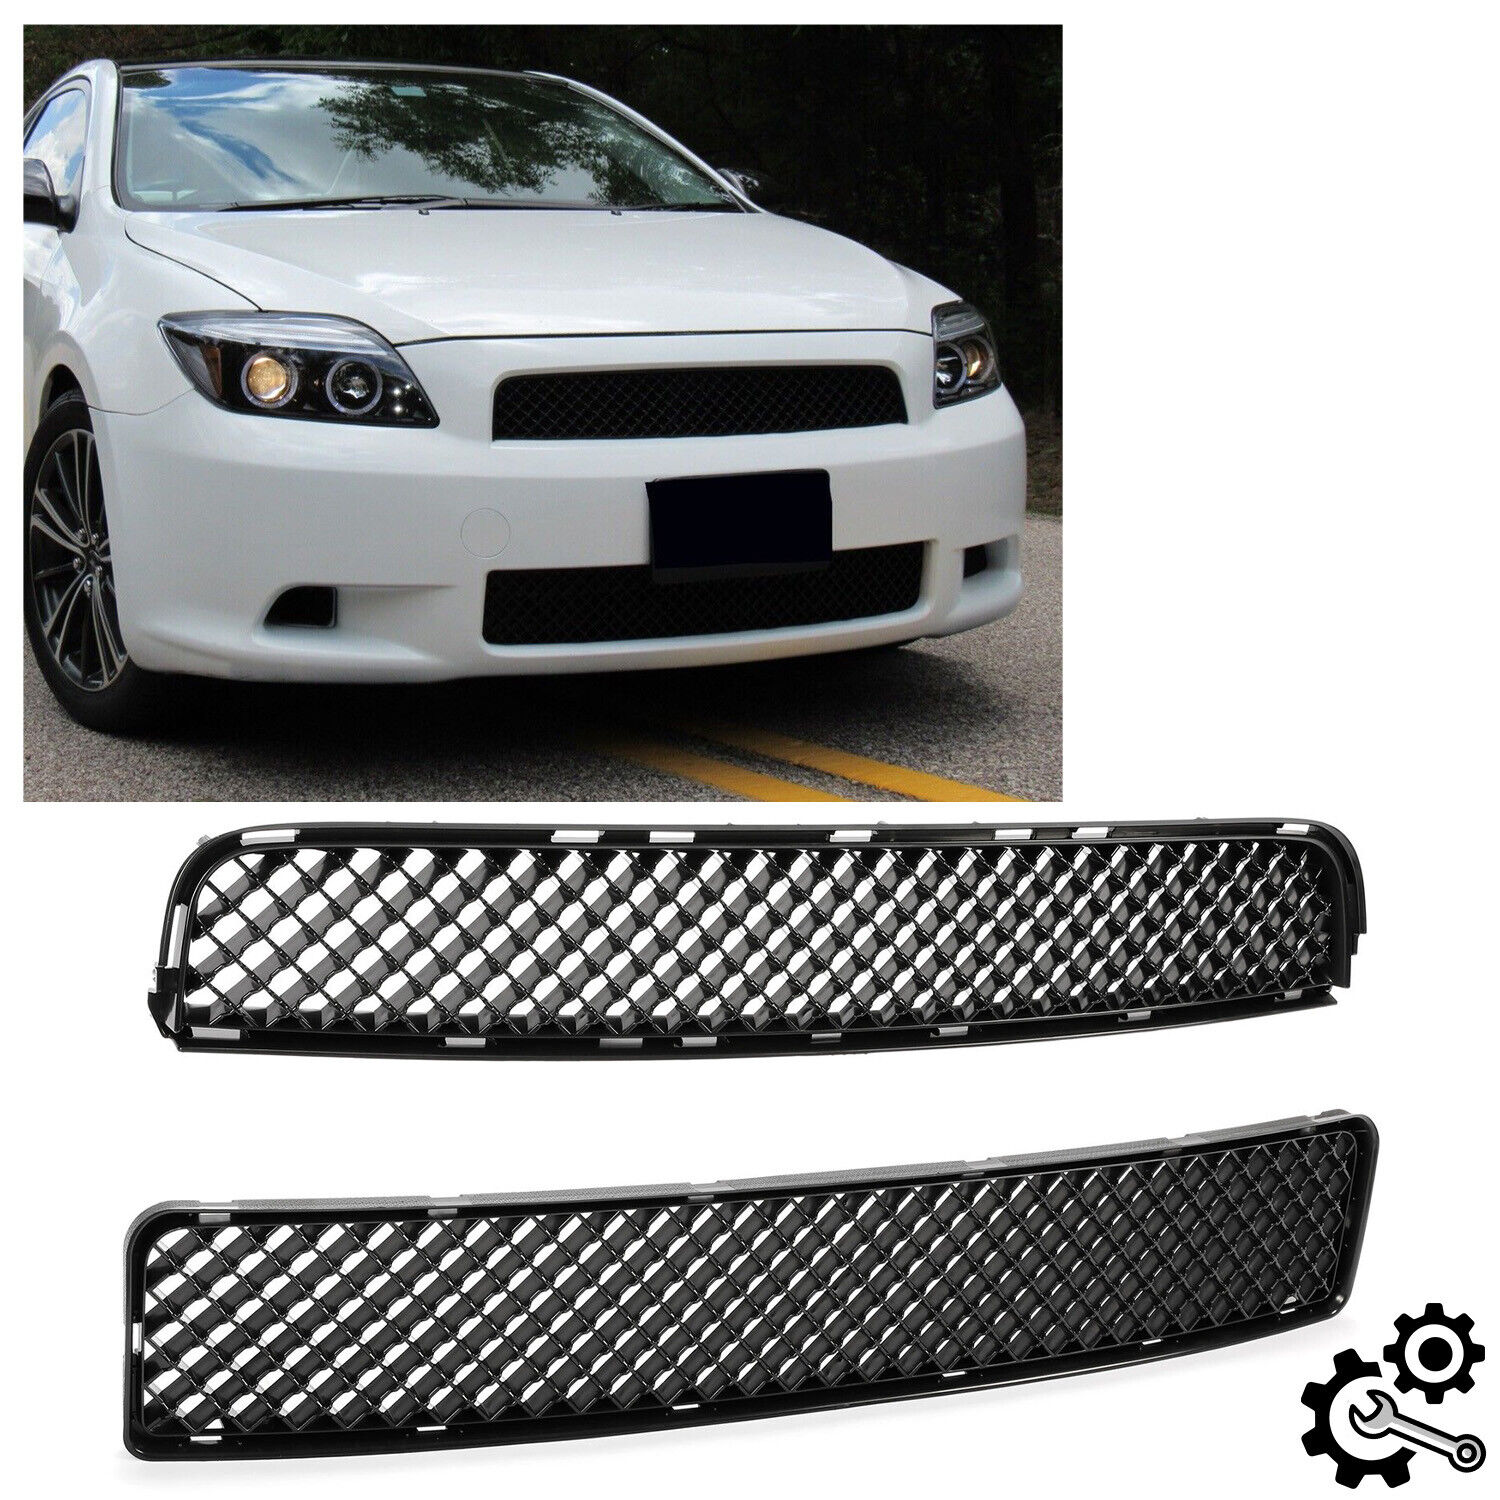 Black Front Air Inlet Mesh Grille ABS For Scion tC 2005-2010 2006 2007 2008 2009